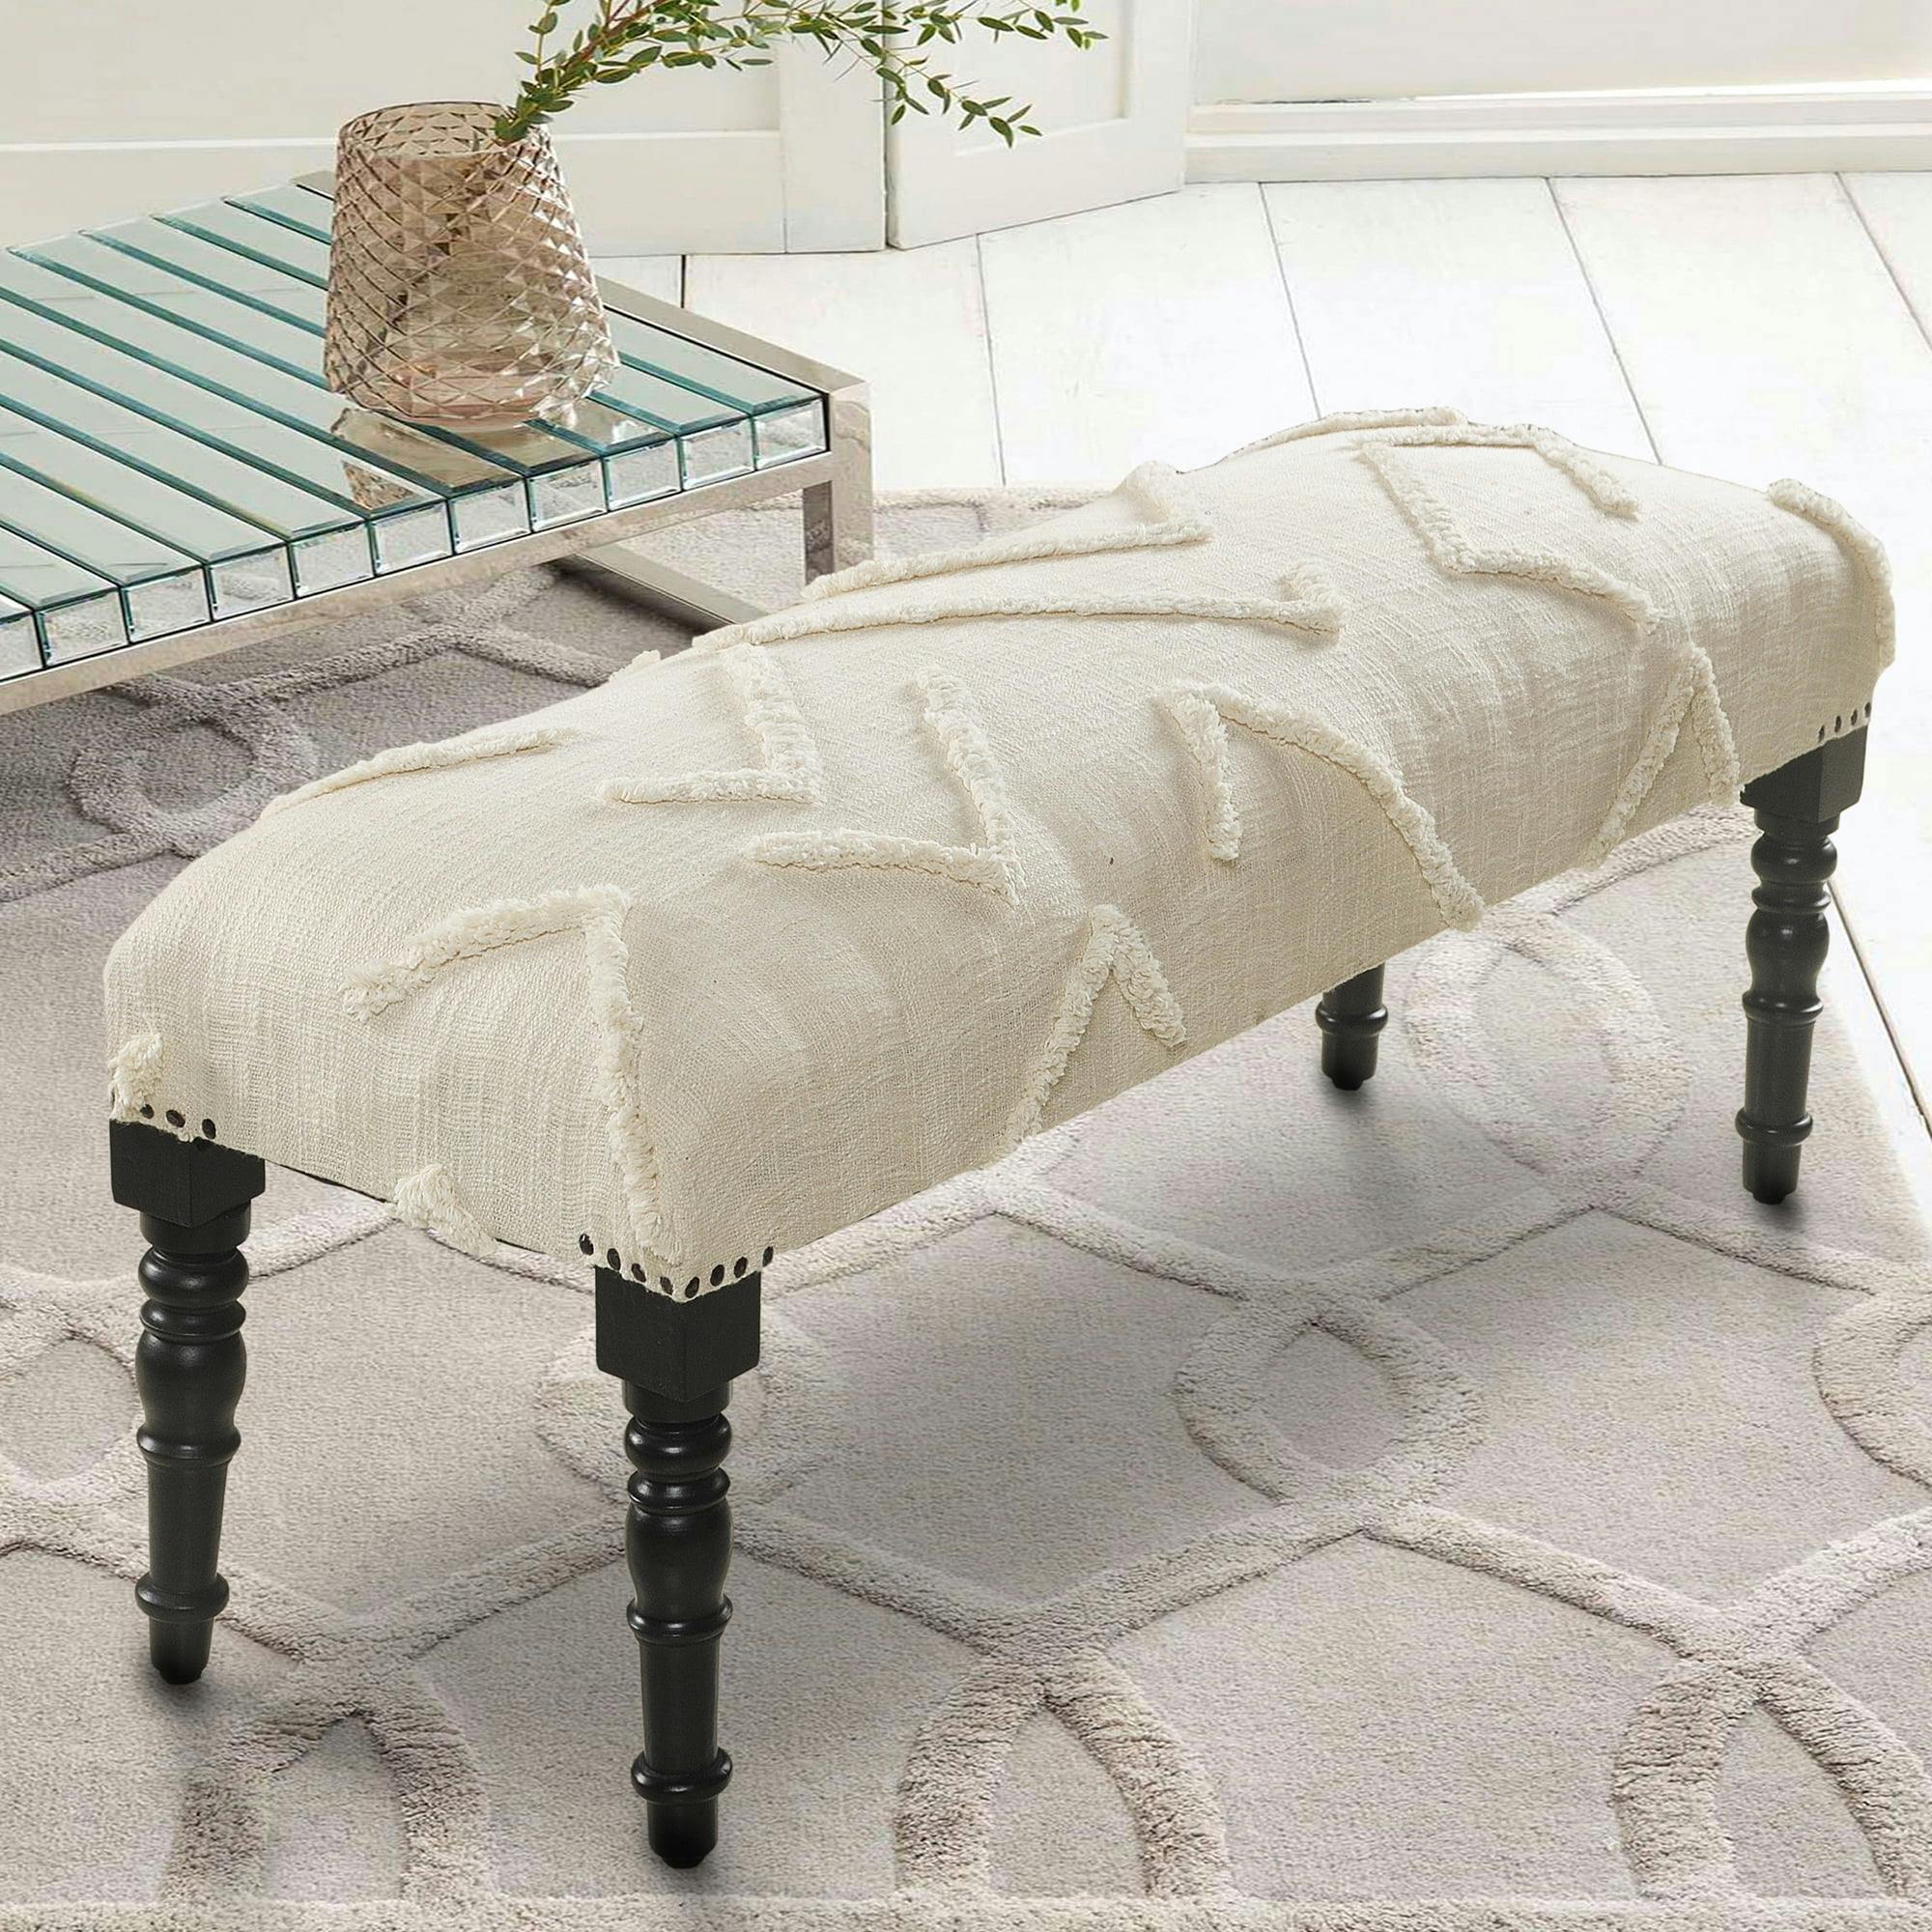 Elegant Cream Tufted Cotton Bench with Wooden Legs, 47"